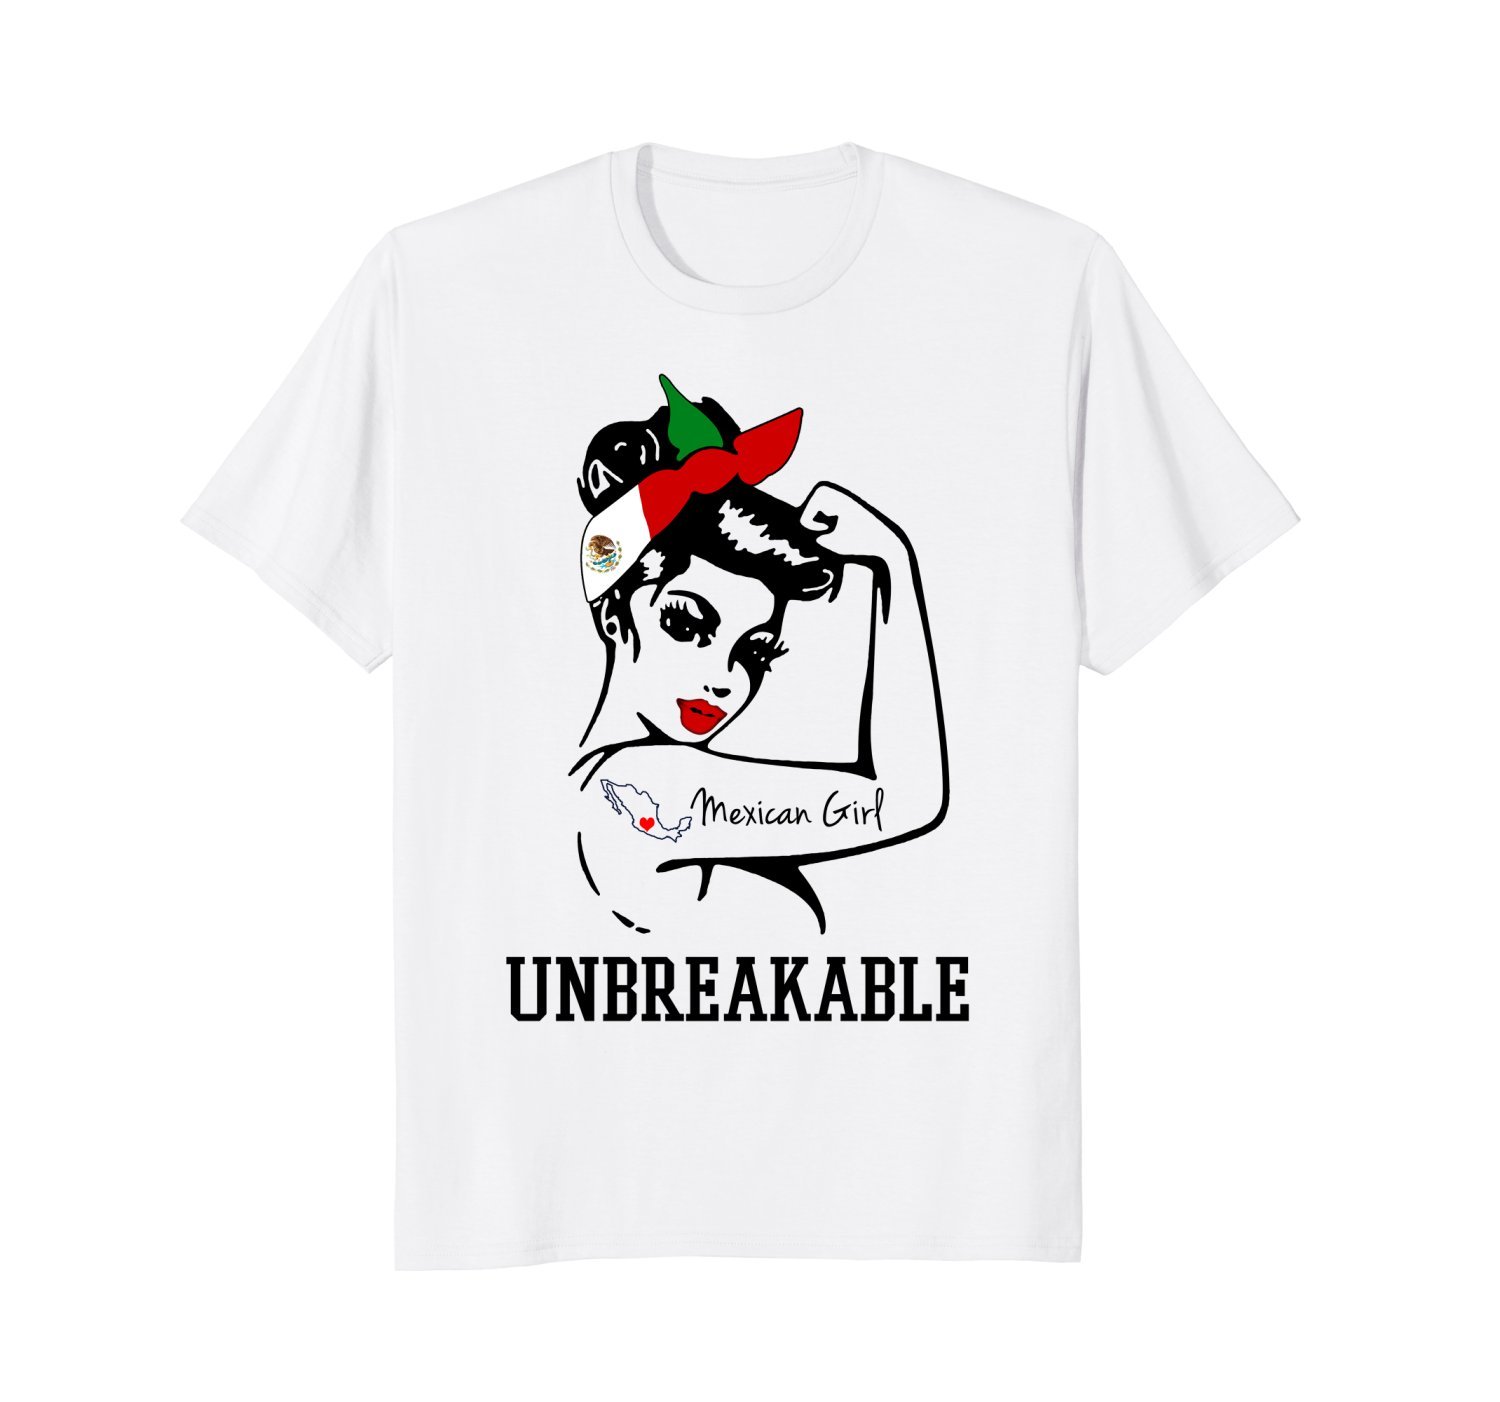 Mexican Girl ' Unbreakable T-shirt